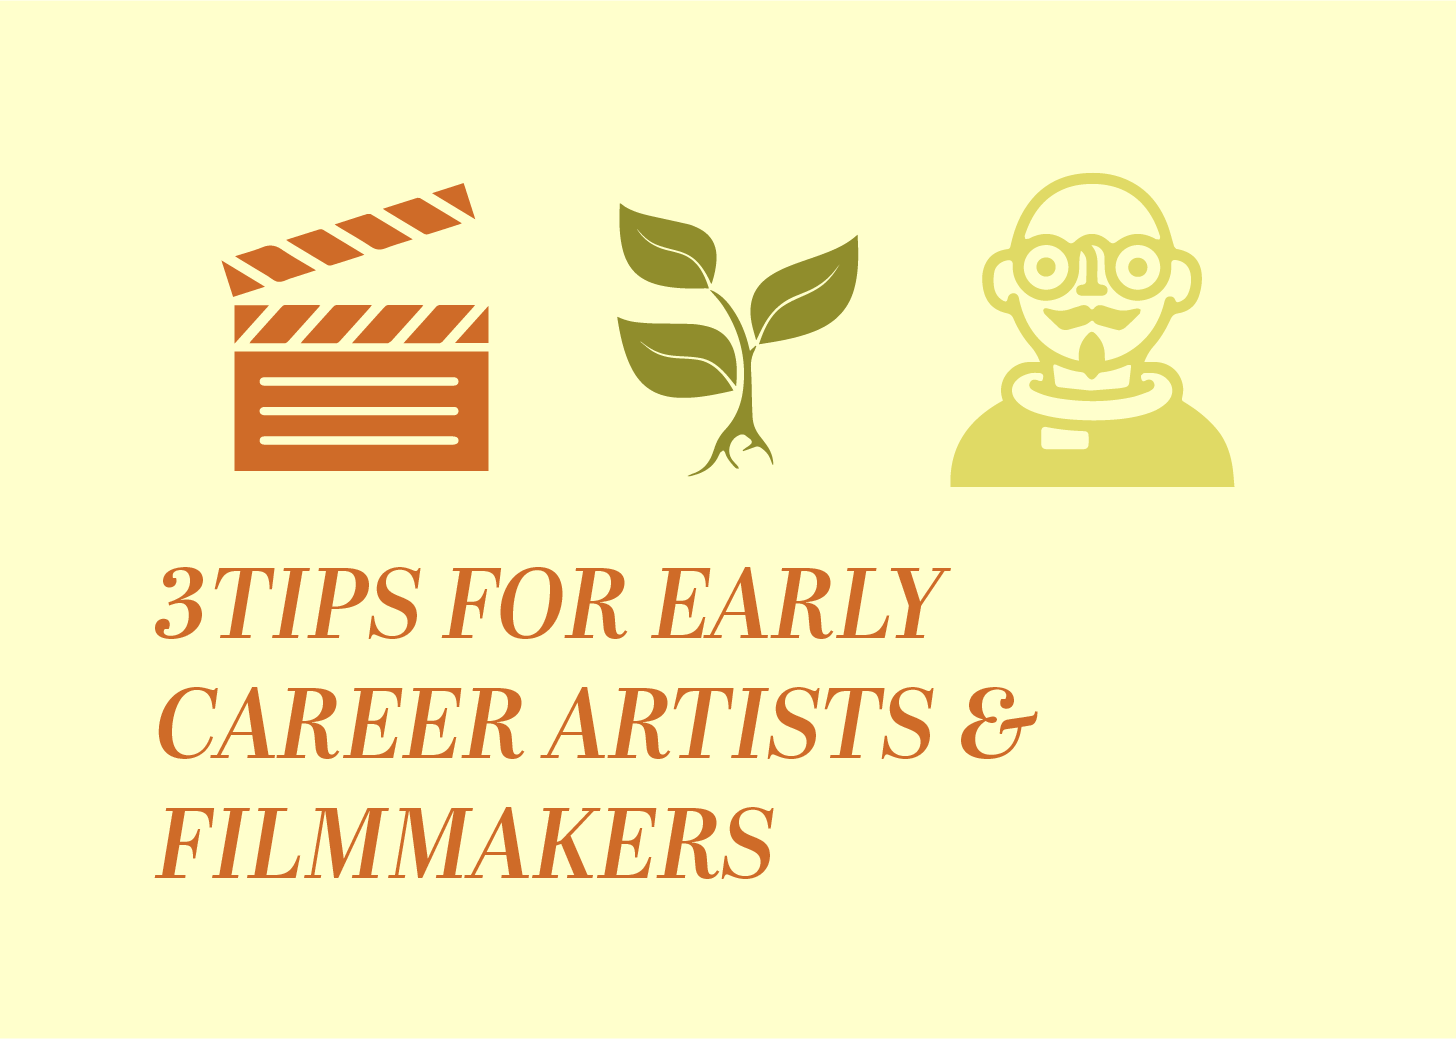 3 Tips for Early Career Artists & Filmmakers